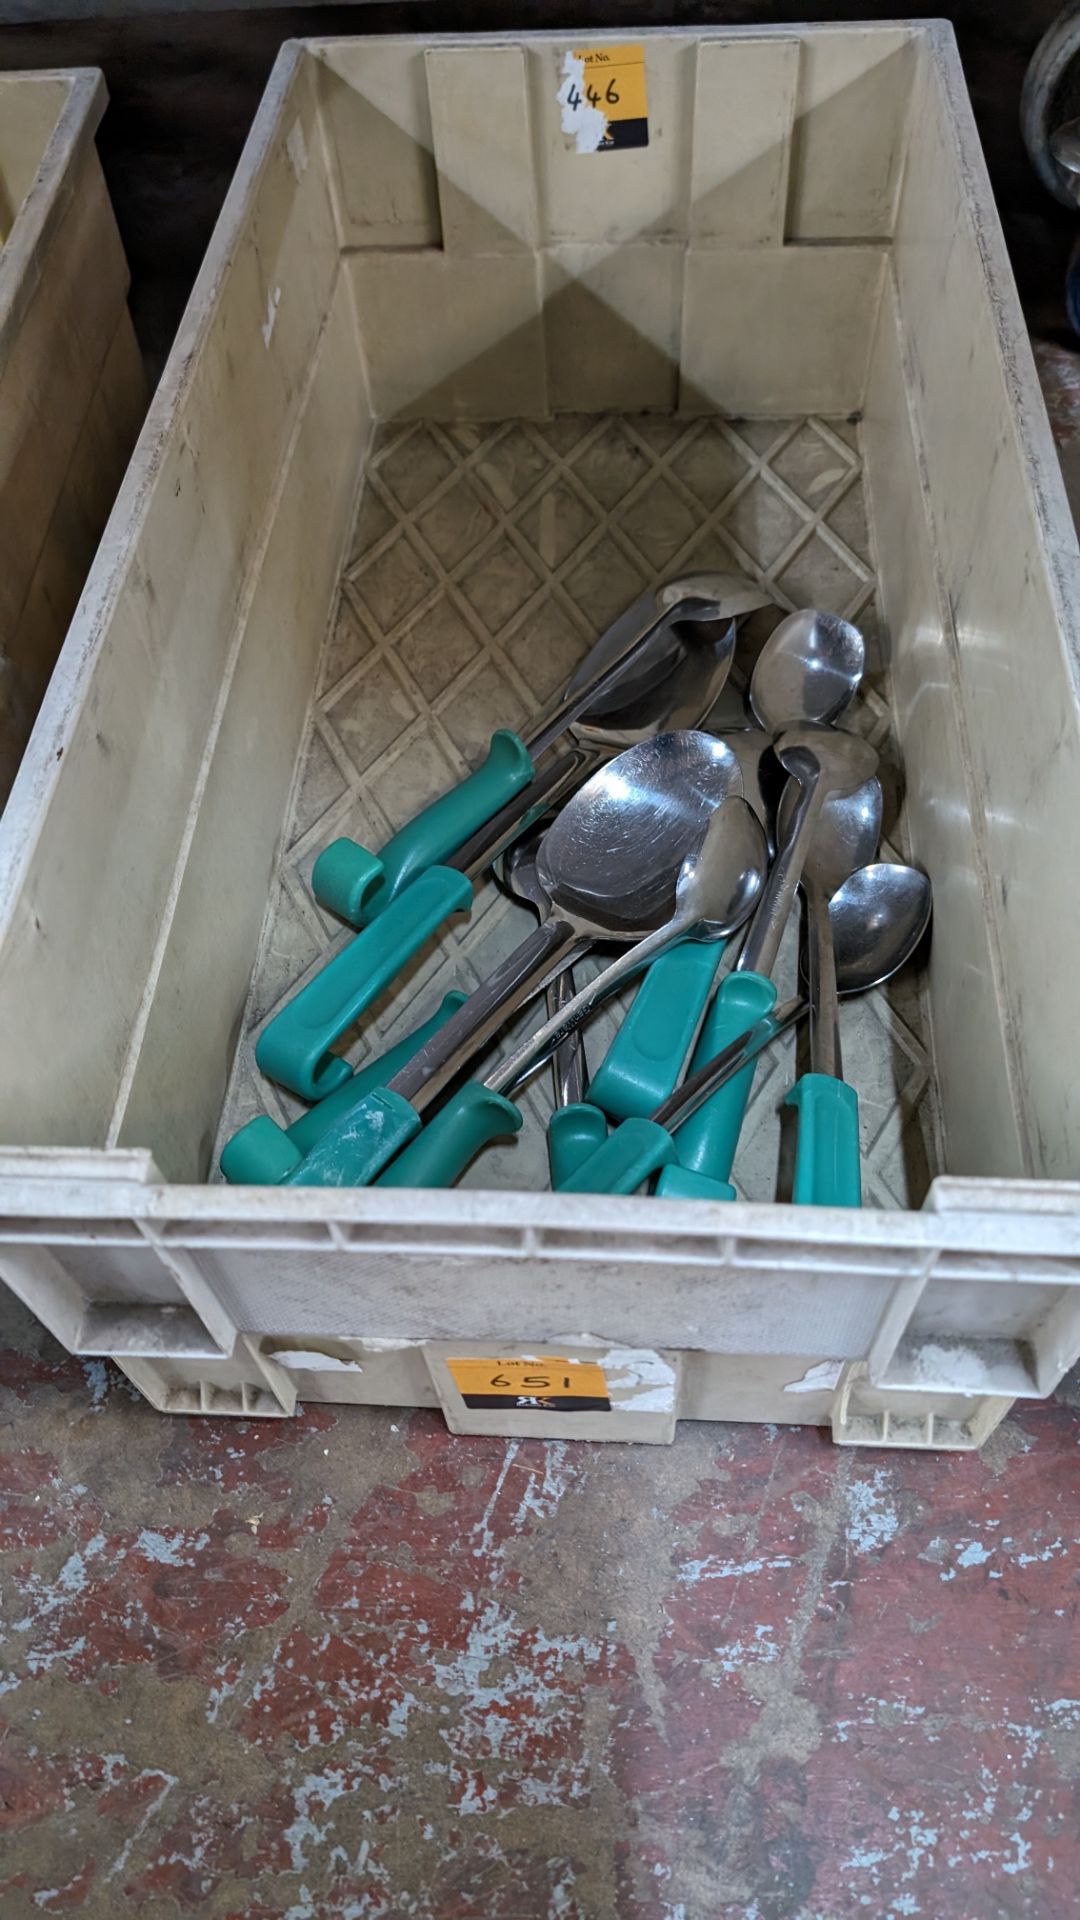 The contents of a crate of spoons